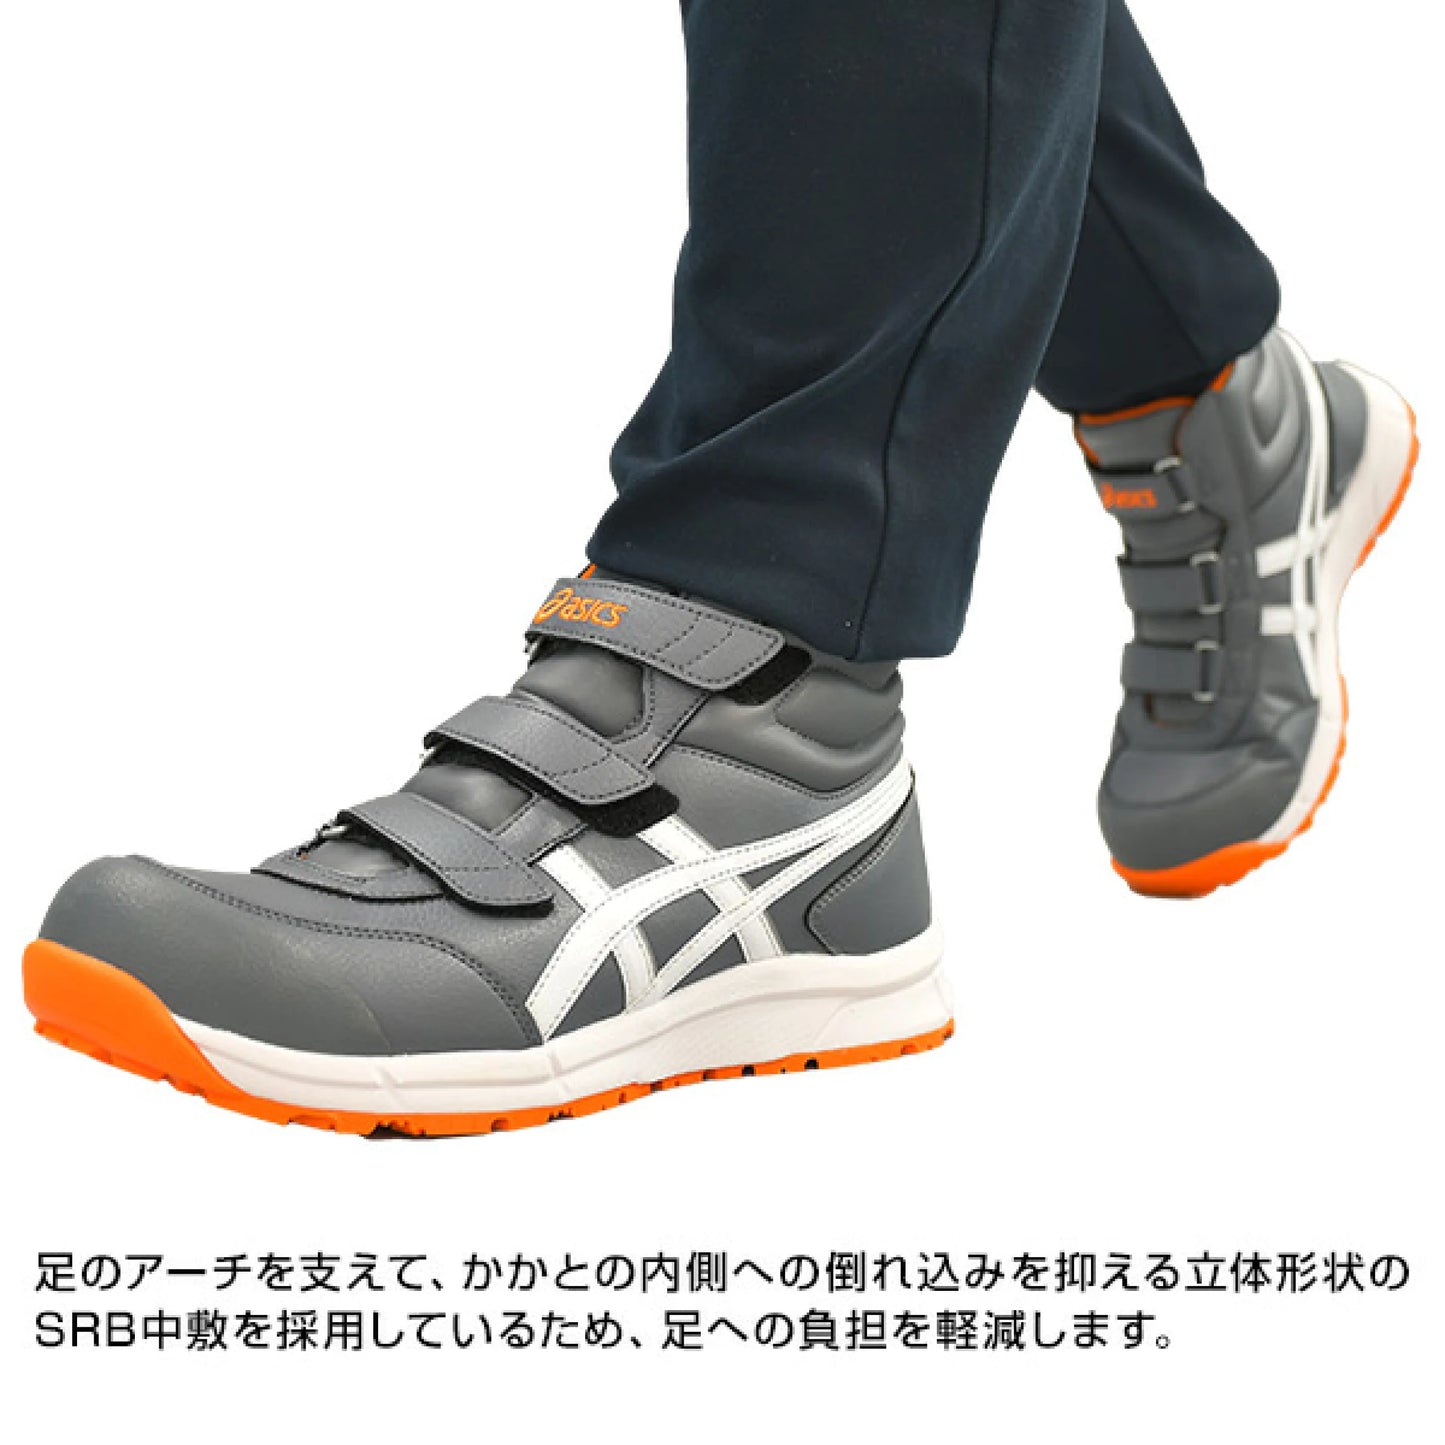 🎌Japan【Order】ASICS gray non-slip safety shoes mid-tube CP302